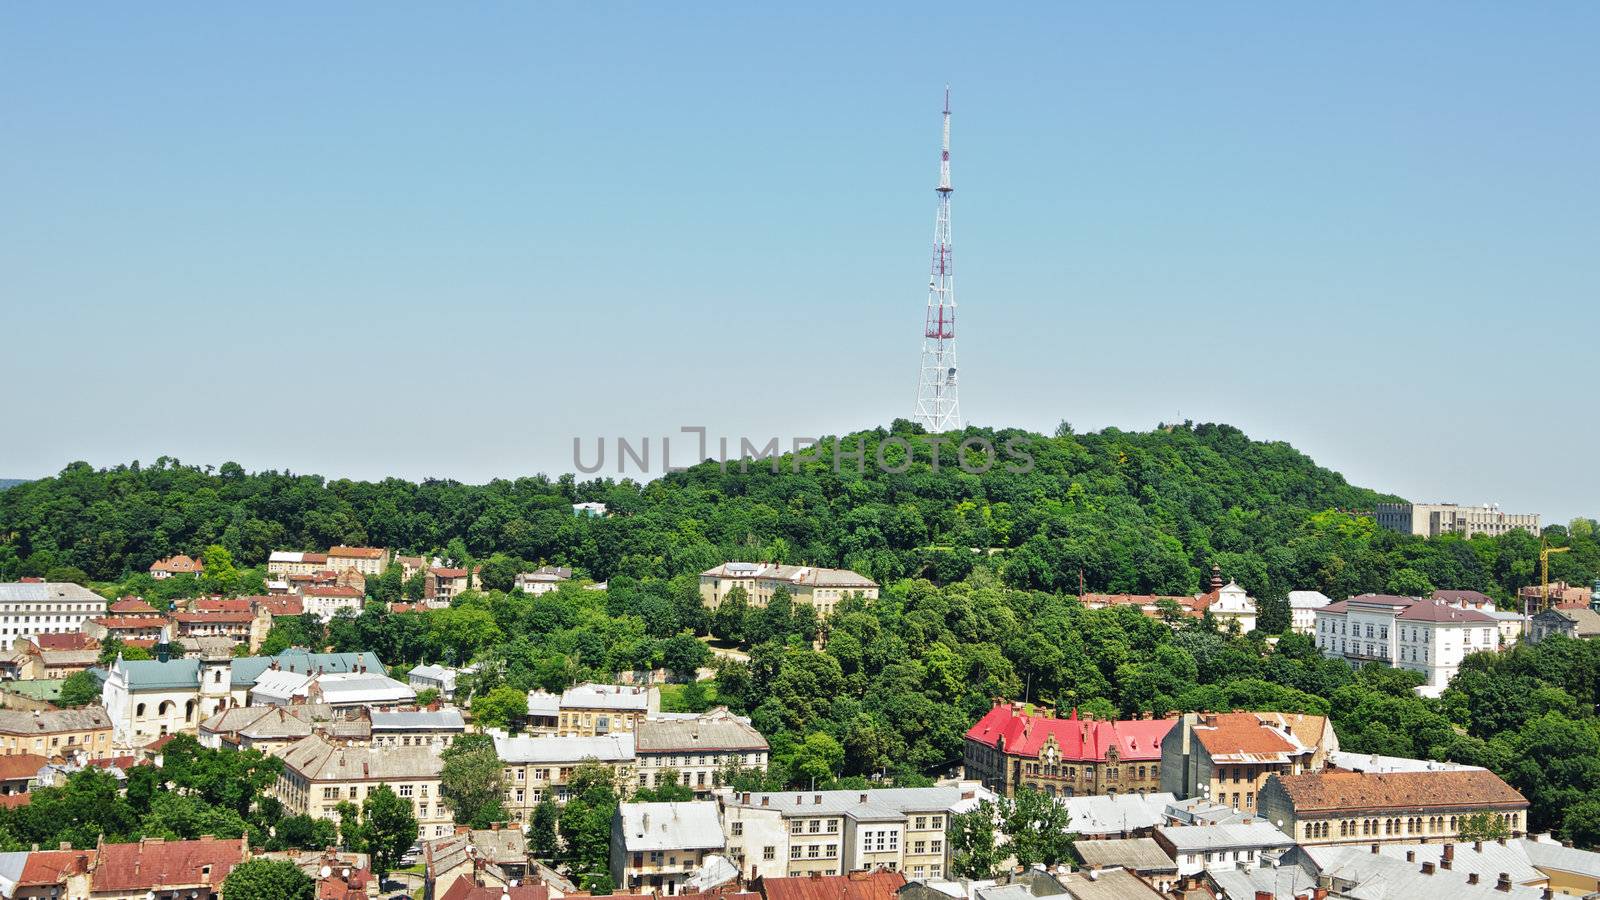 lviv at summer, view from City Hall